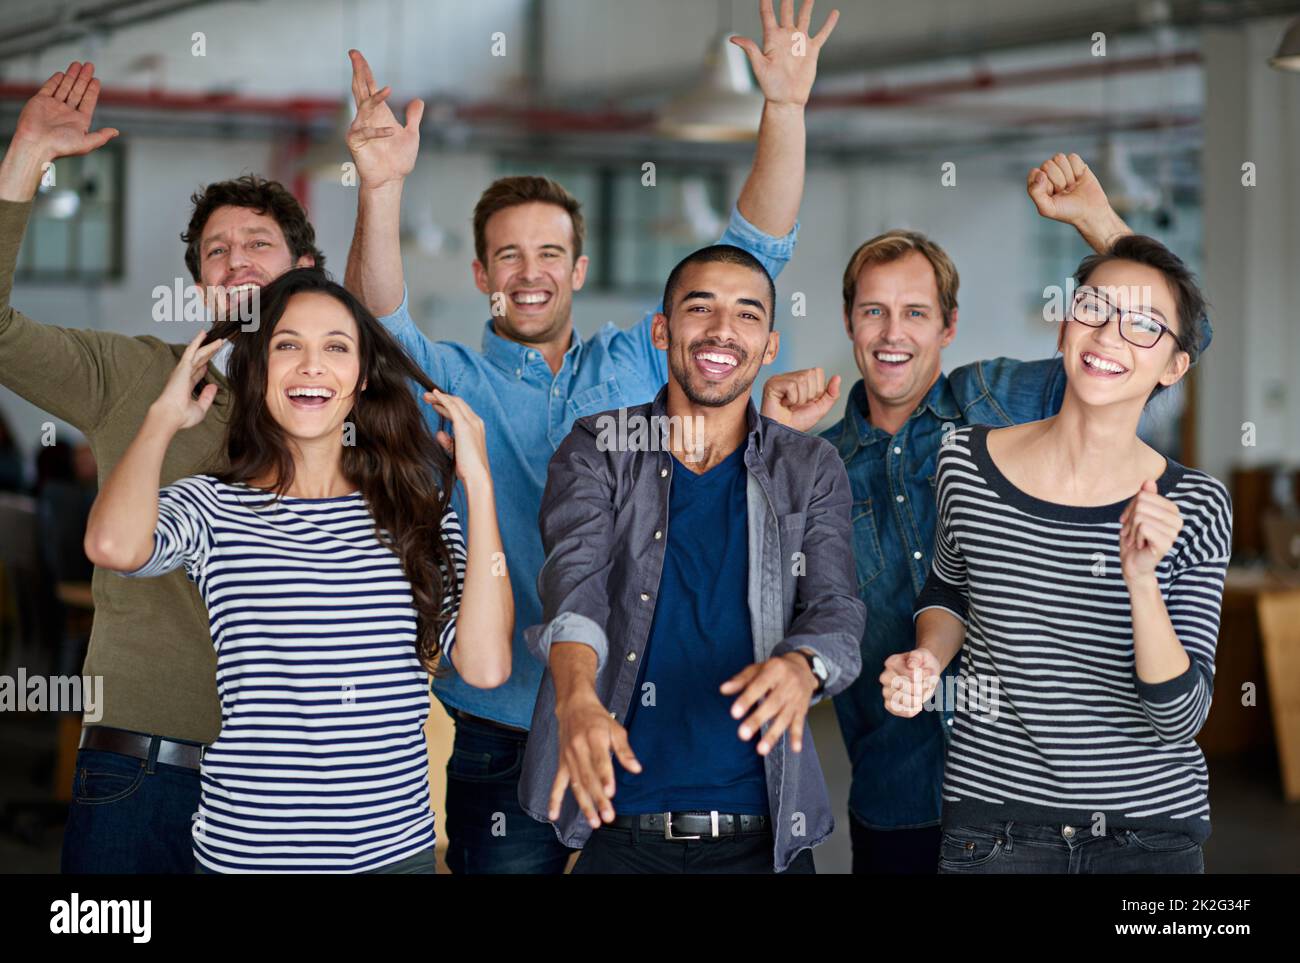 Now thats what I call team spirit. Joyous group of office staff jumping around and having fun together. Stock Photo